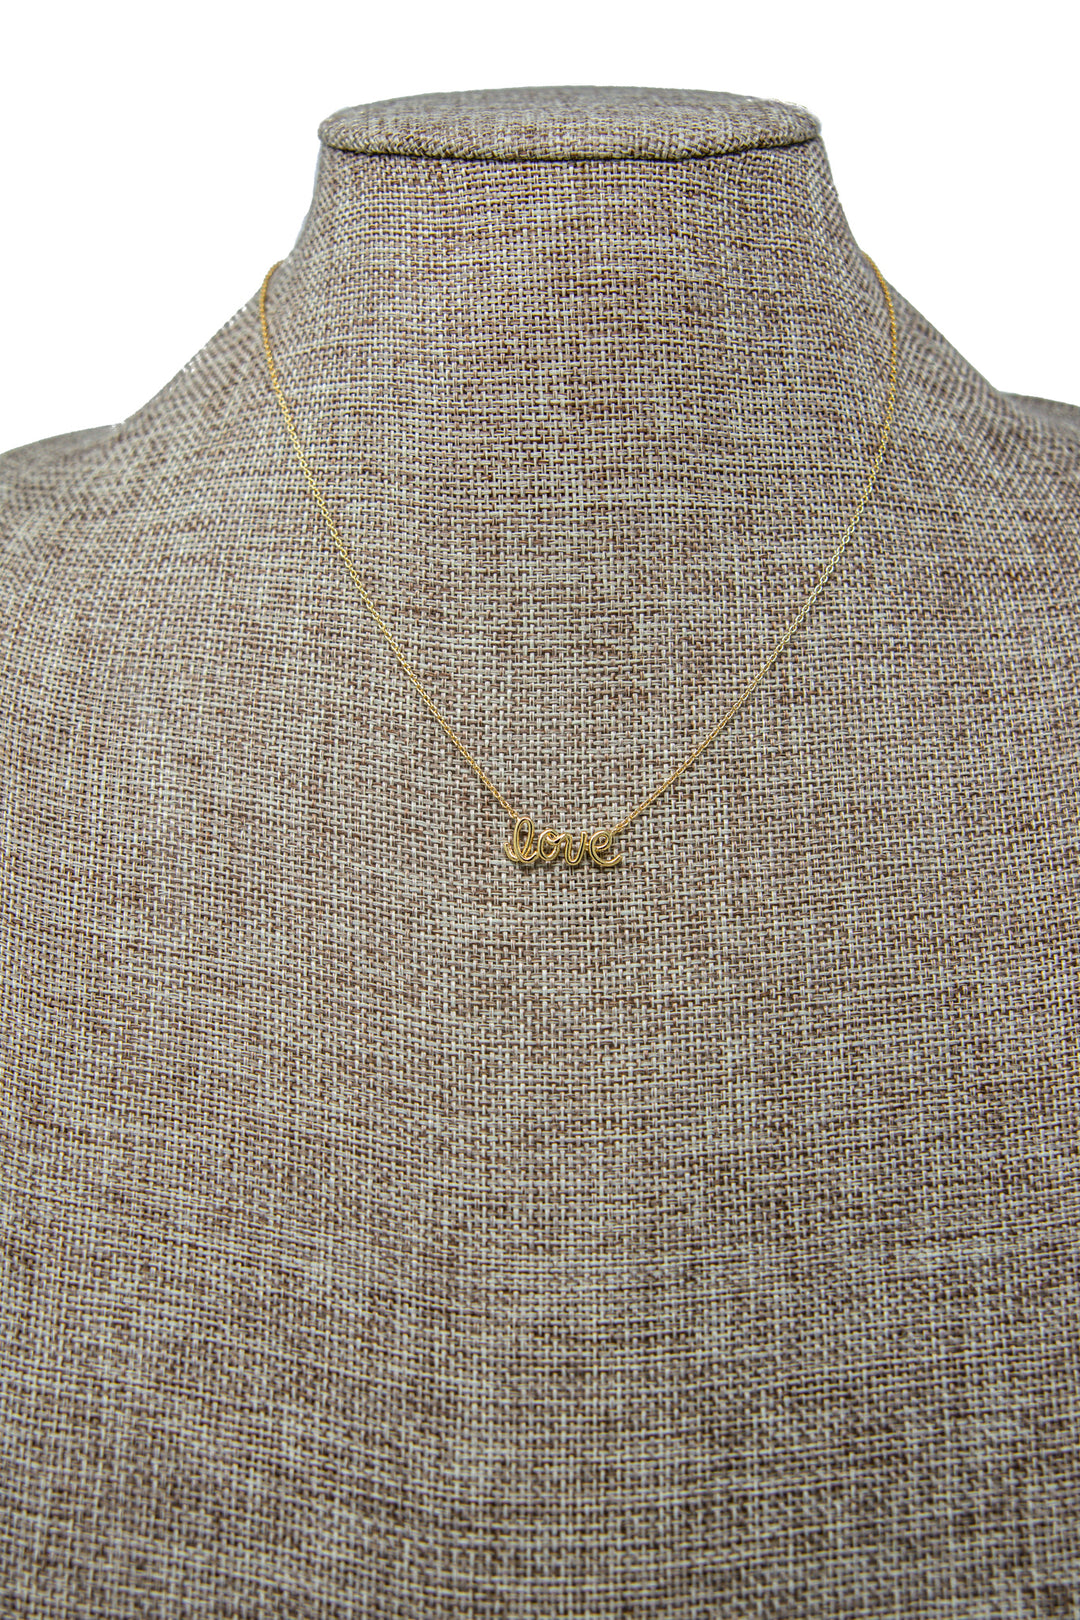 Endless Love Necklace